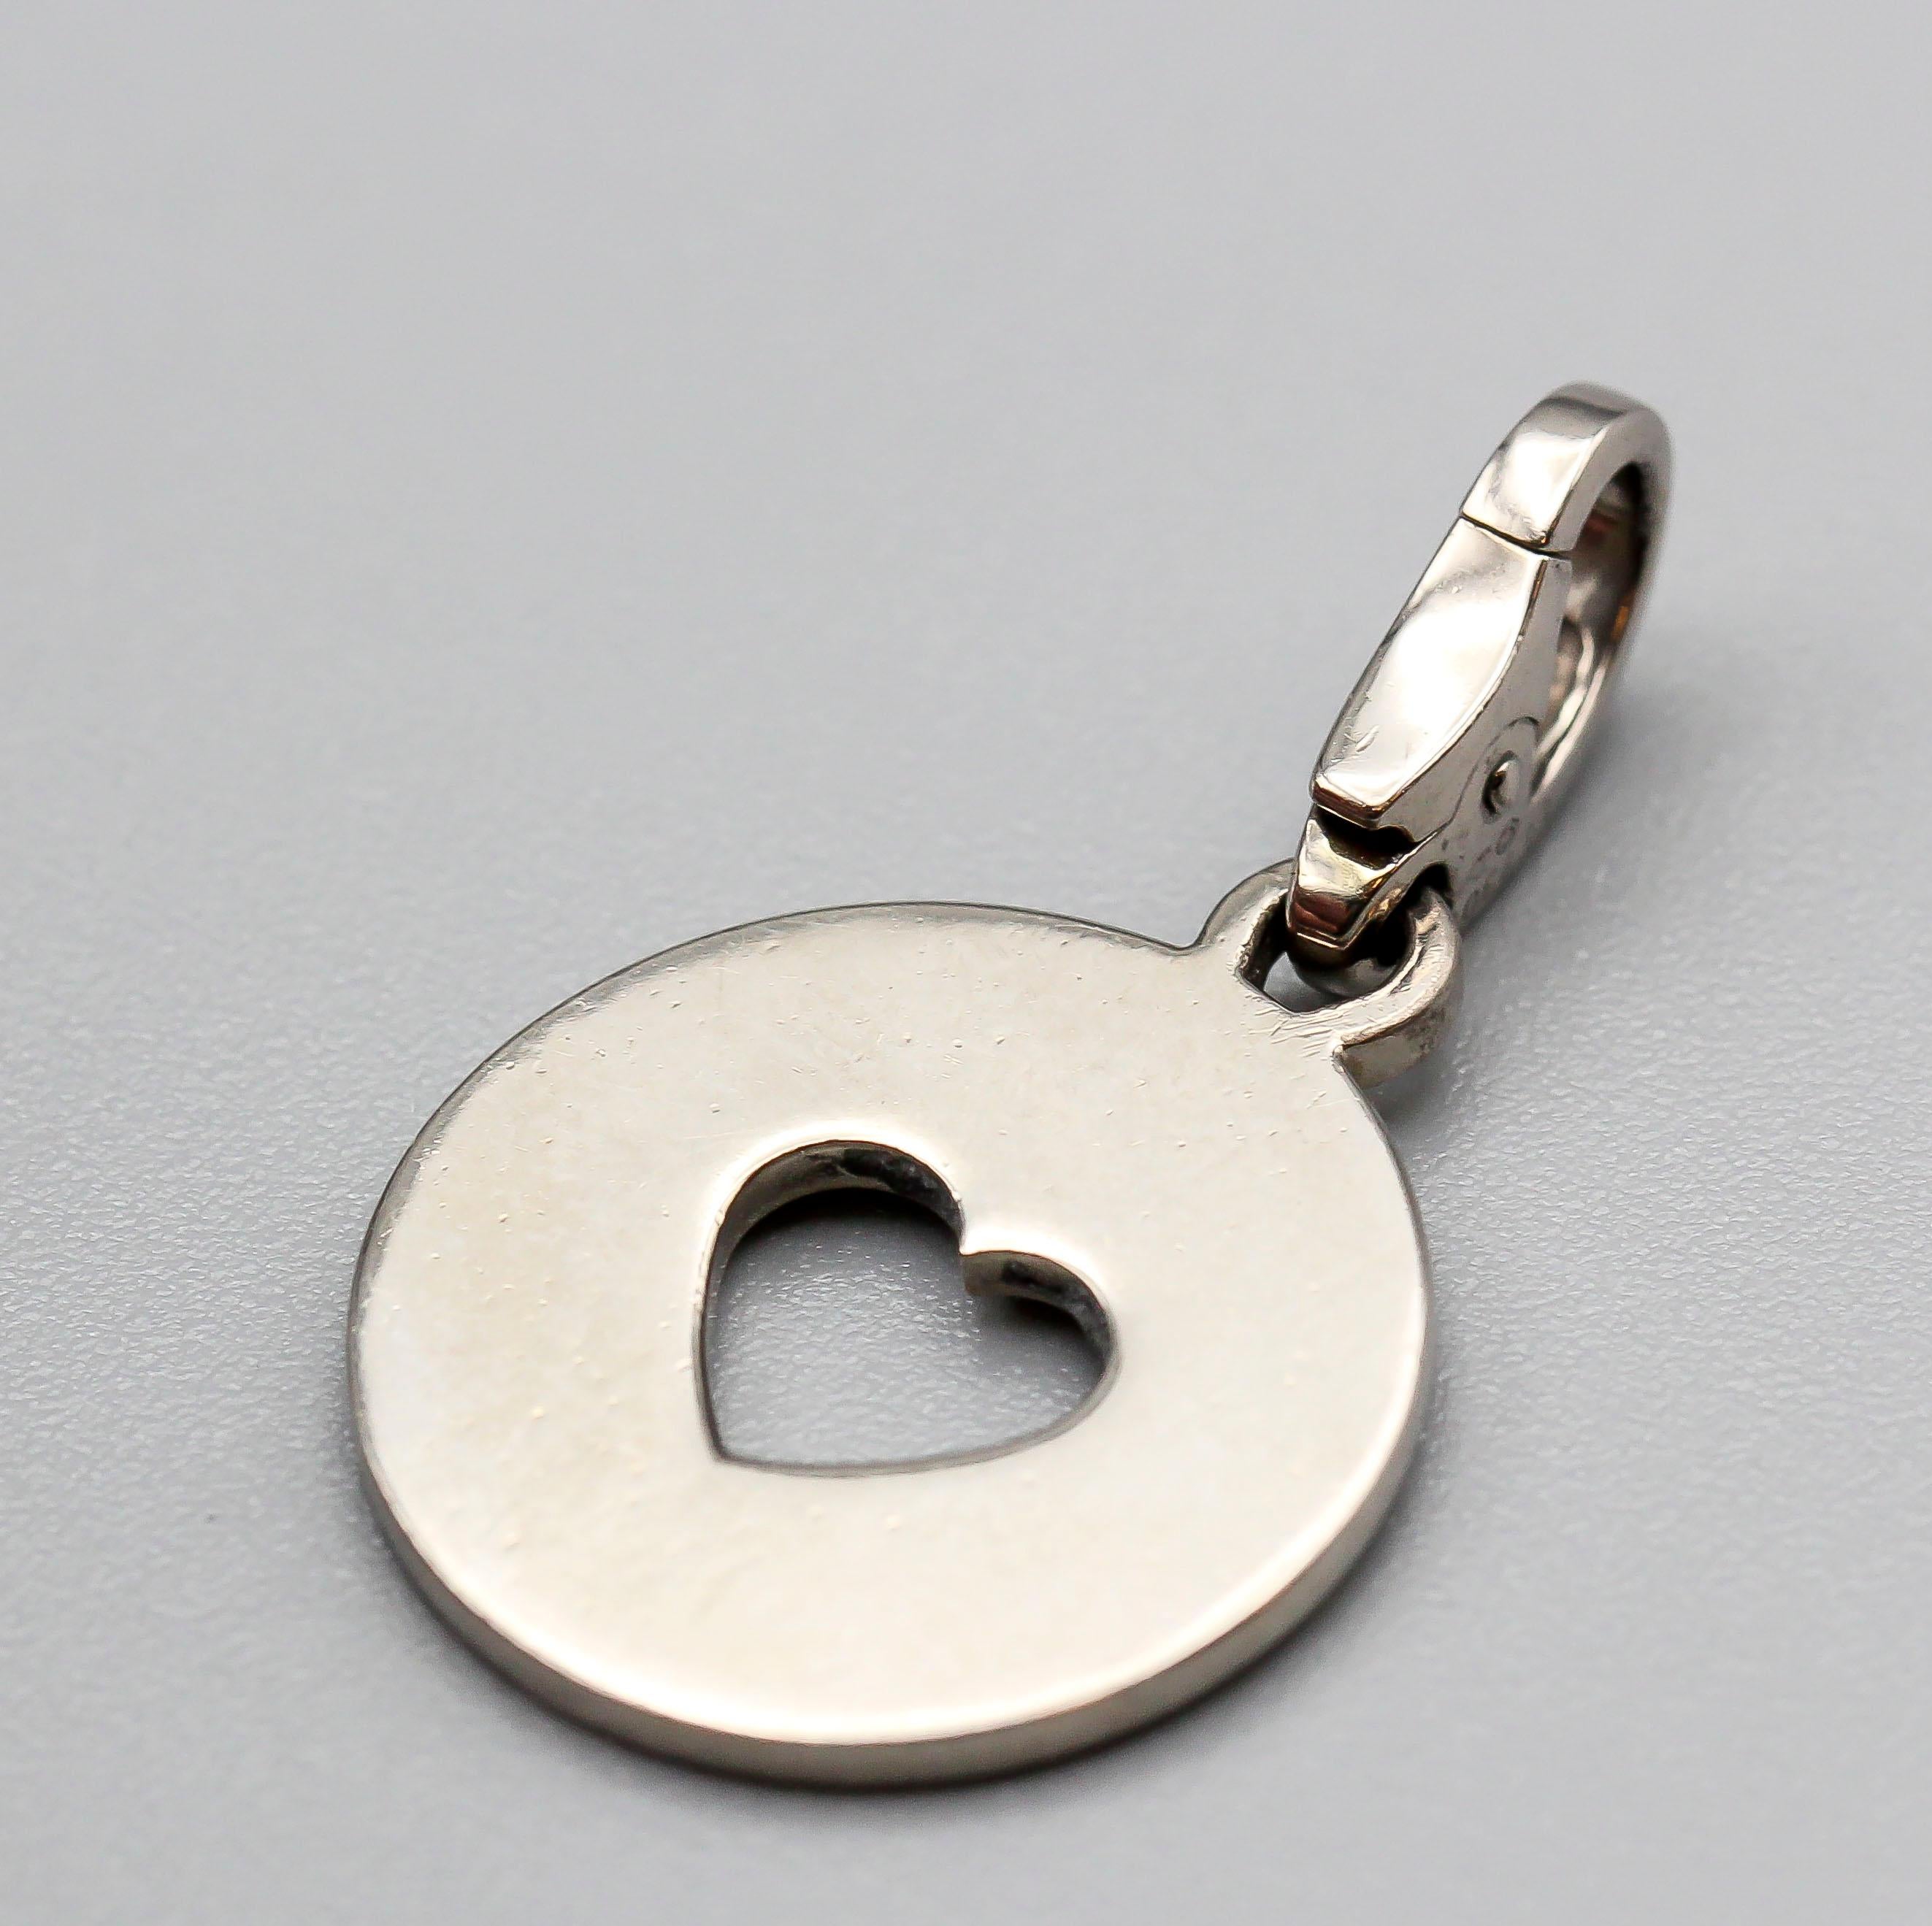 Fine 18K white gold charm by Cartier. It features a round charm with a heart shaped cut out.   Well made and easy to add to any bracelet or pendant.

Hallmarks: Cartier, 750 reference numbers